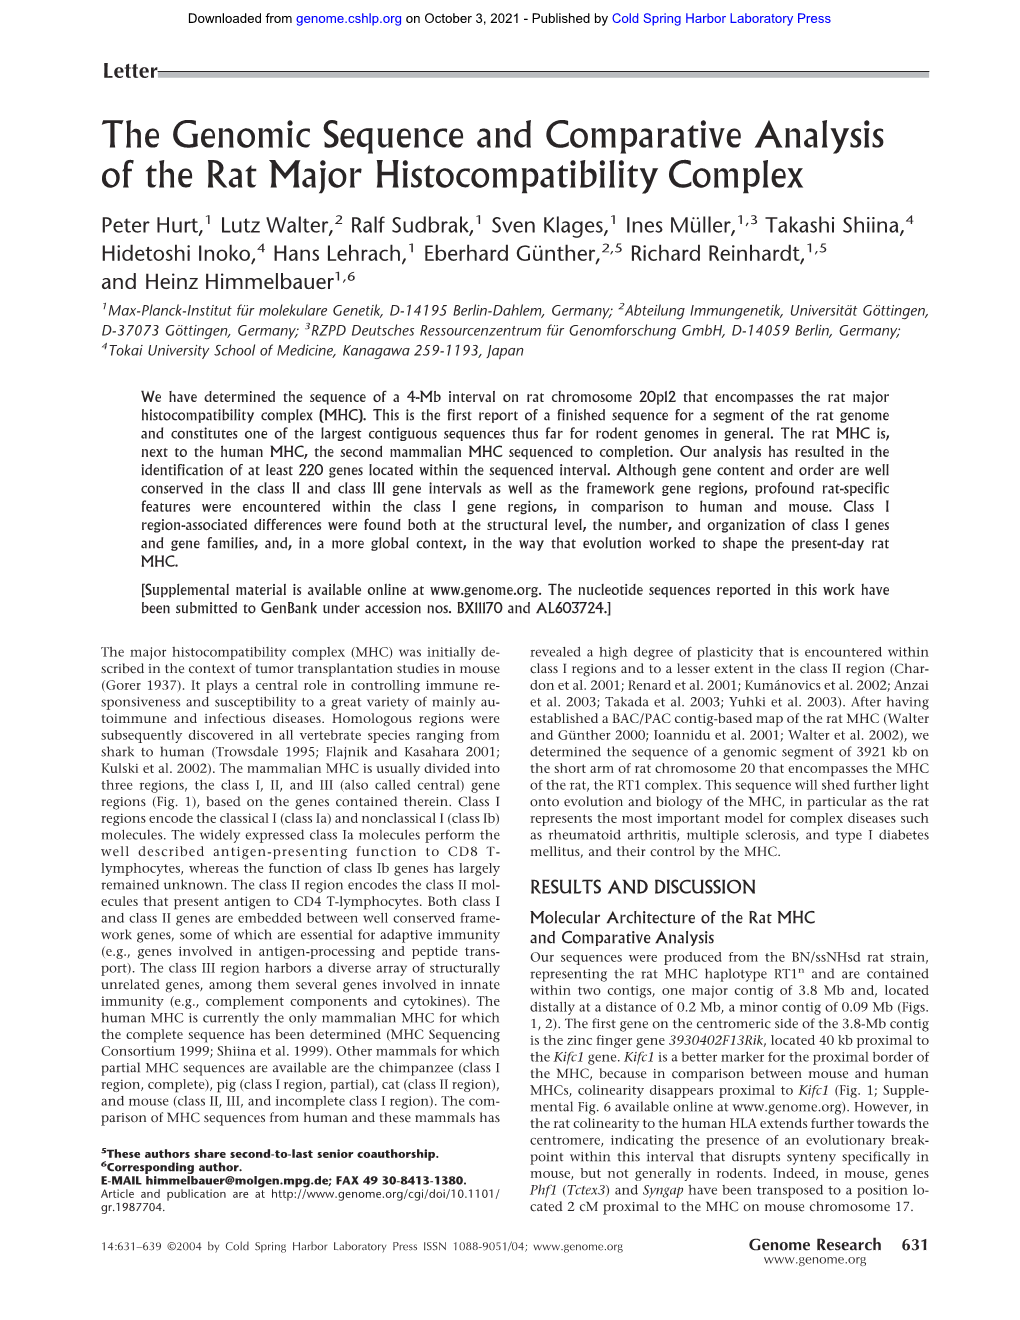 The Genomic Sequence and Comparative Analysis of the Rat Major Histocompatibility Complex